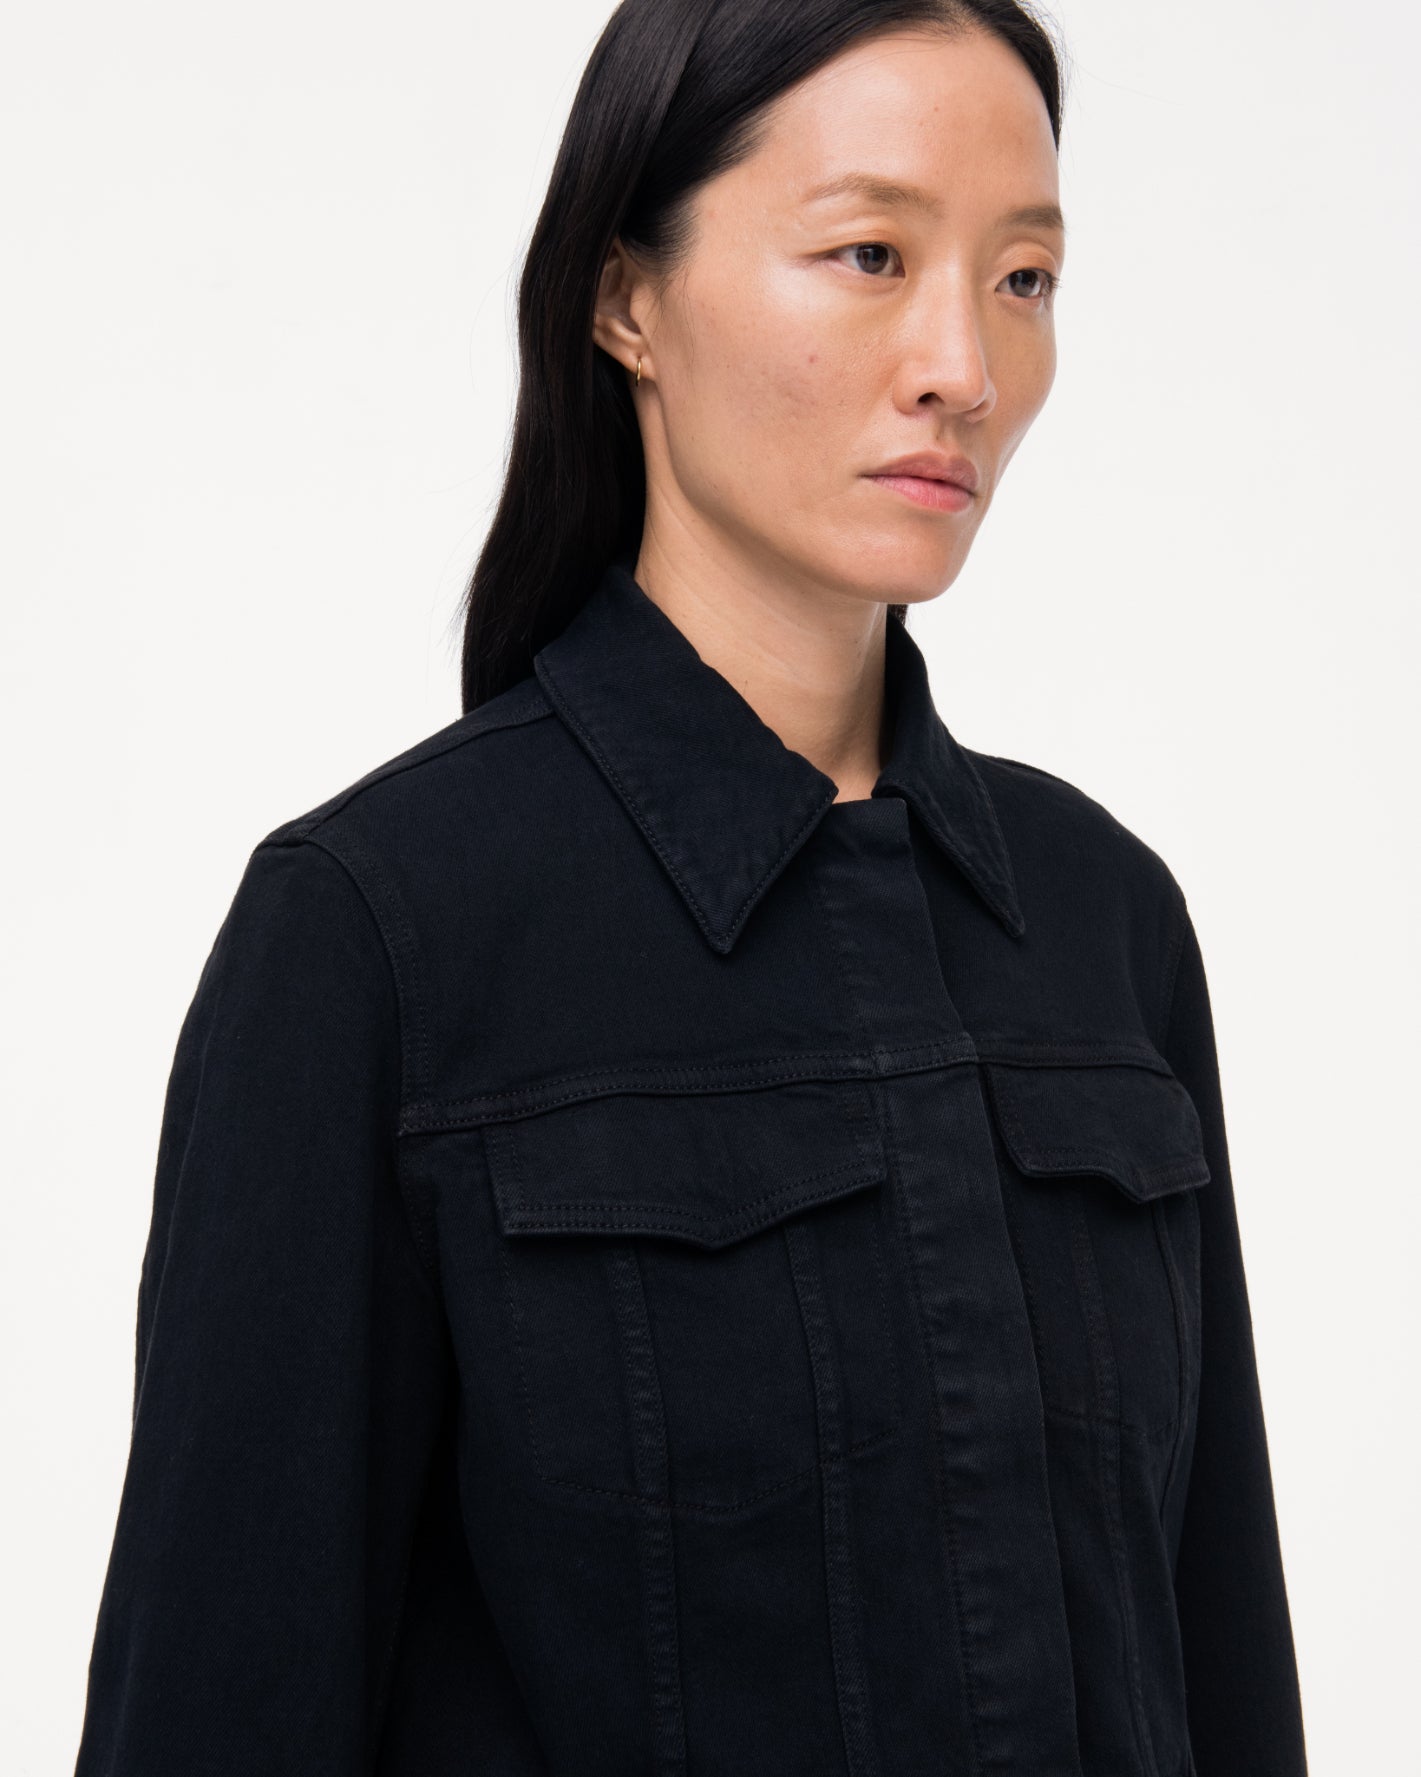 On The Move Crop Denim Jacket For Sale - Fashion Jackets & Coats | Truesdale